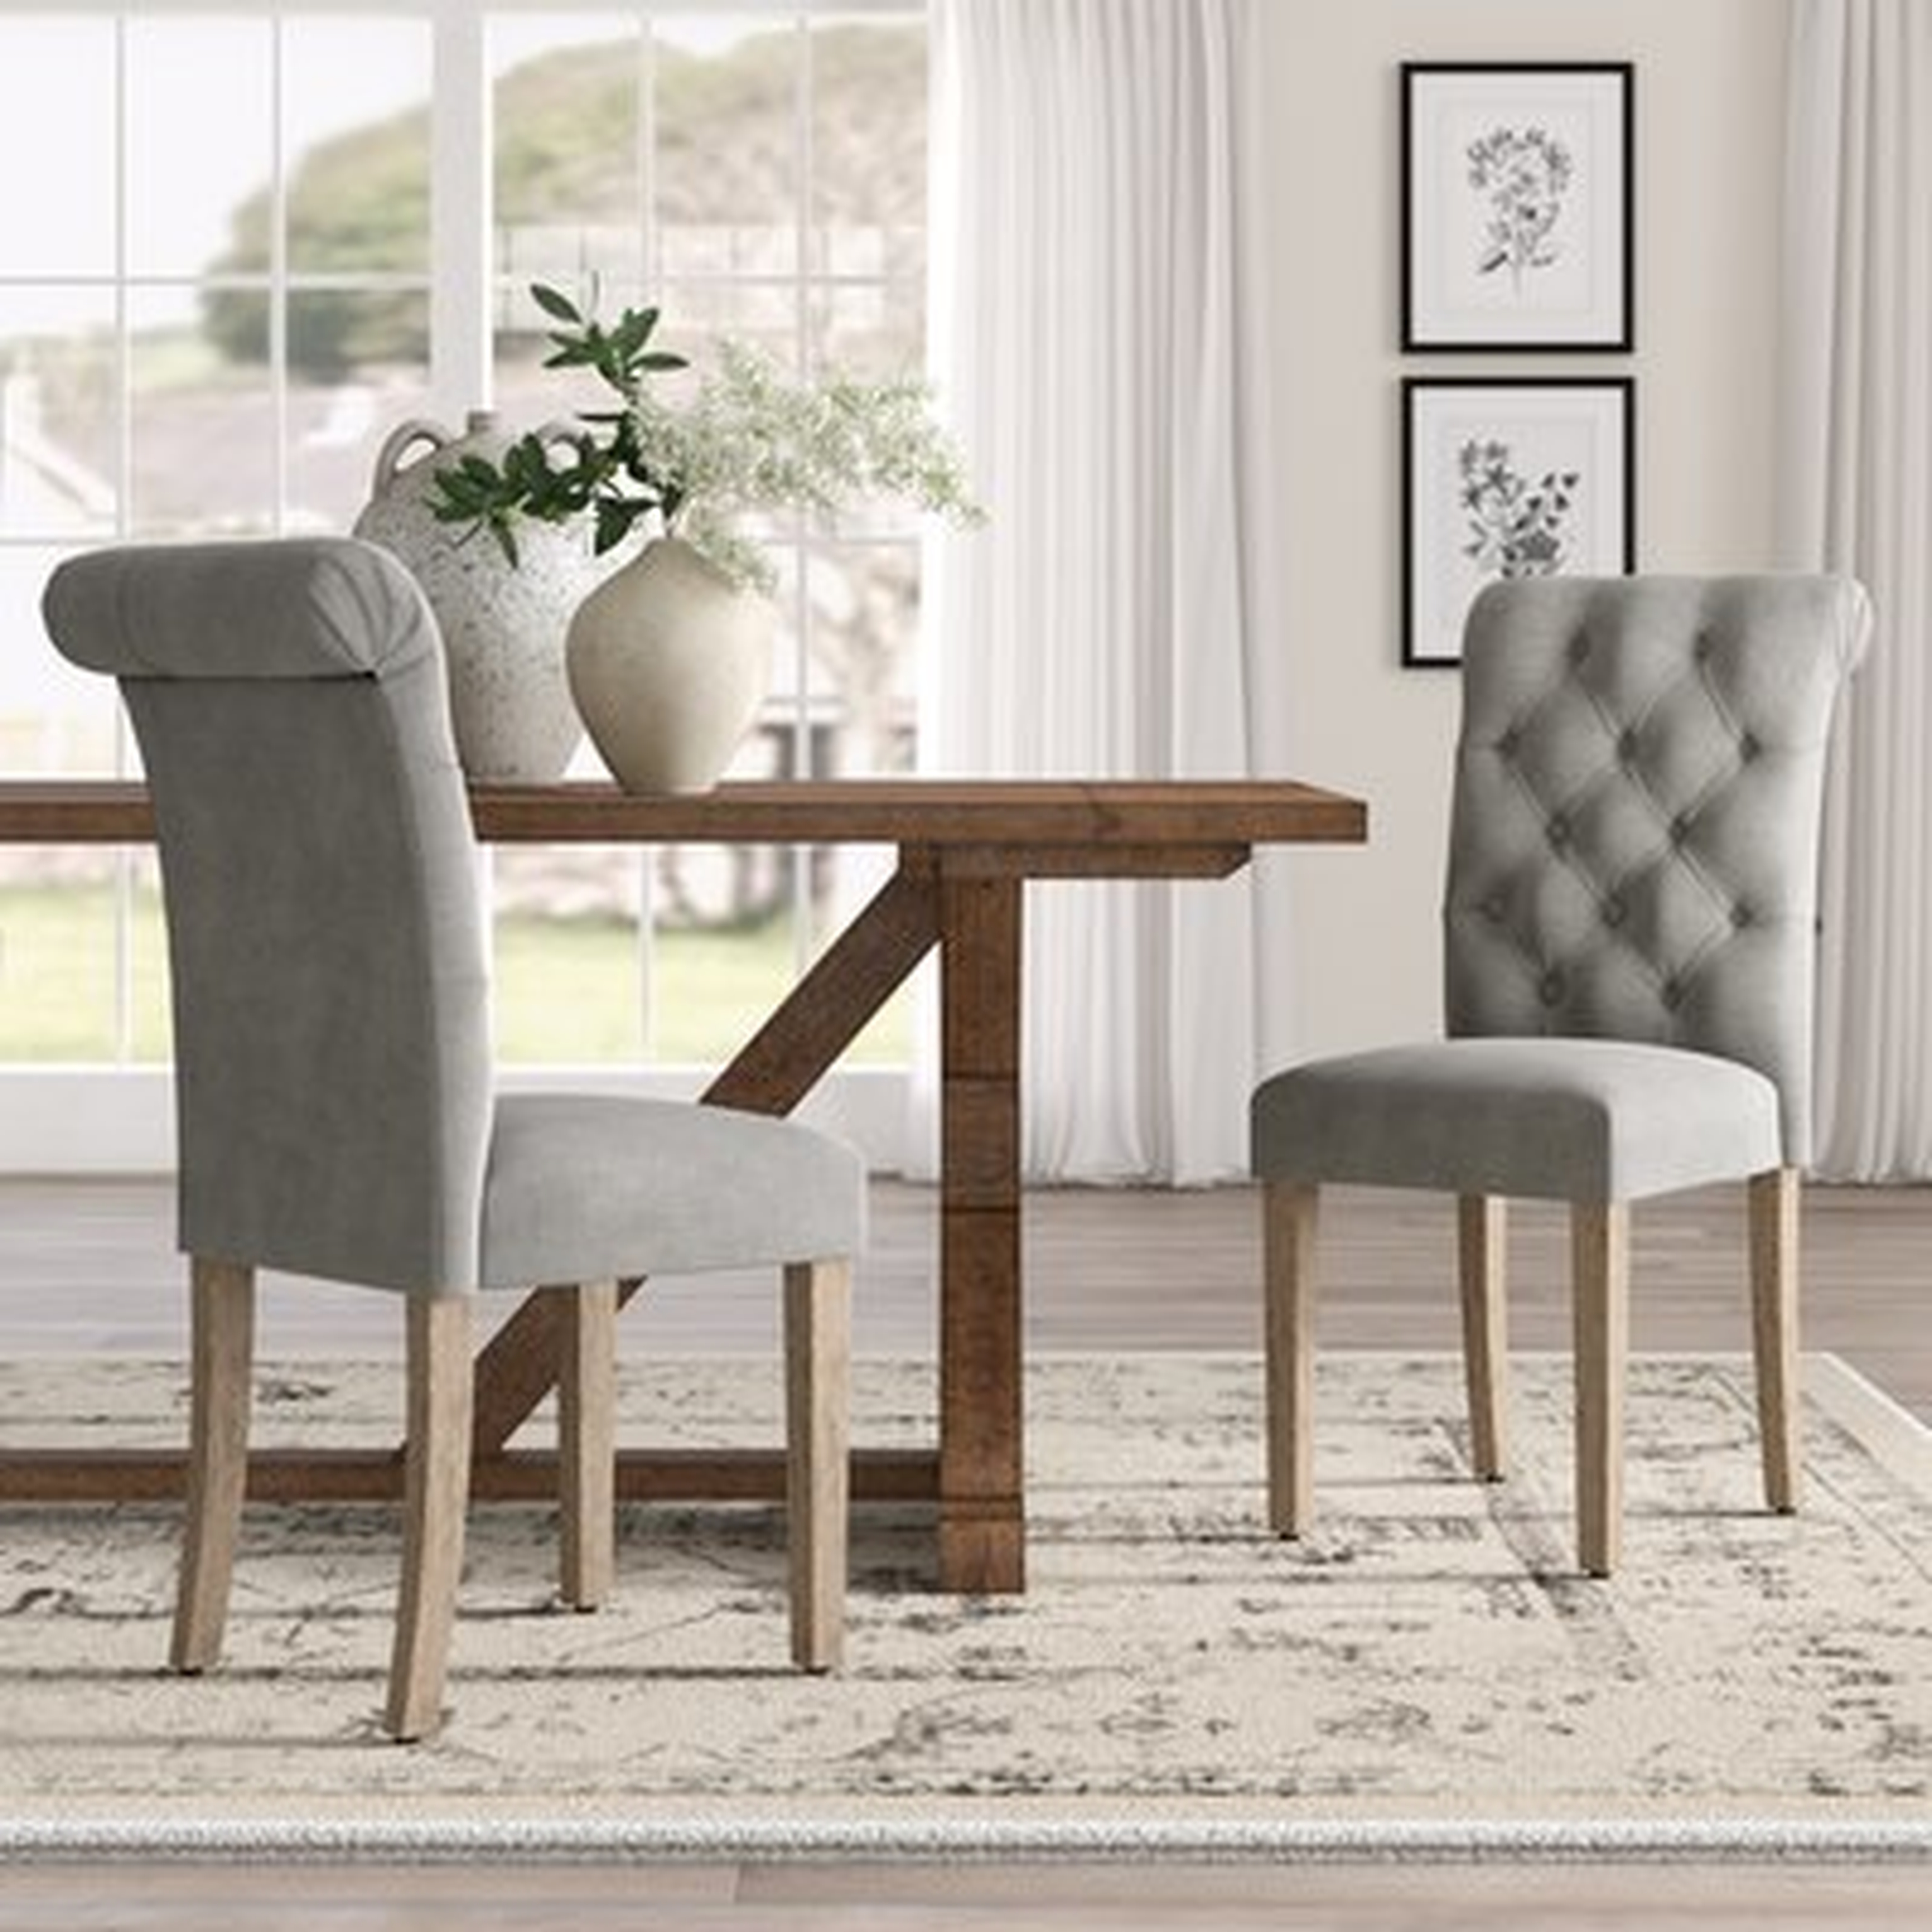 Bushey Roll Top Tufted Modern Upholstered Dining Chair, Set of 2 - Wayfair